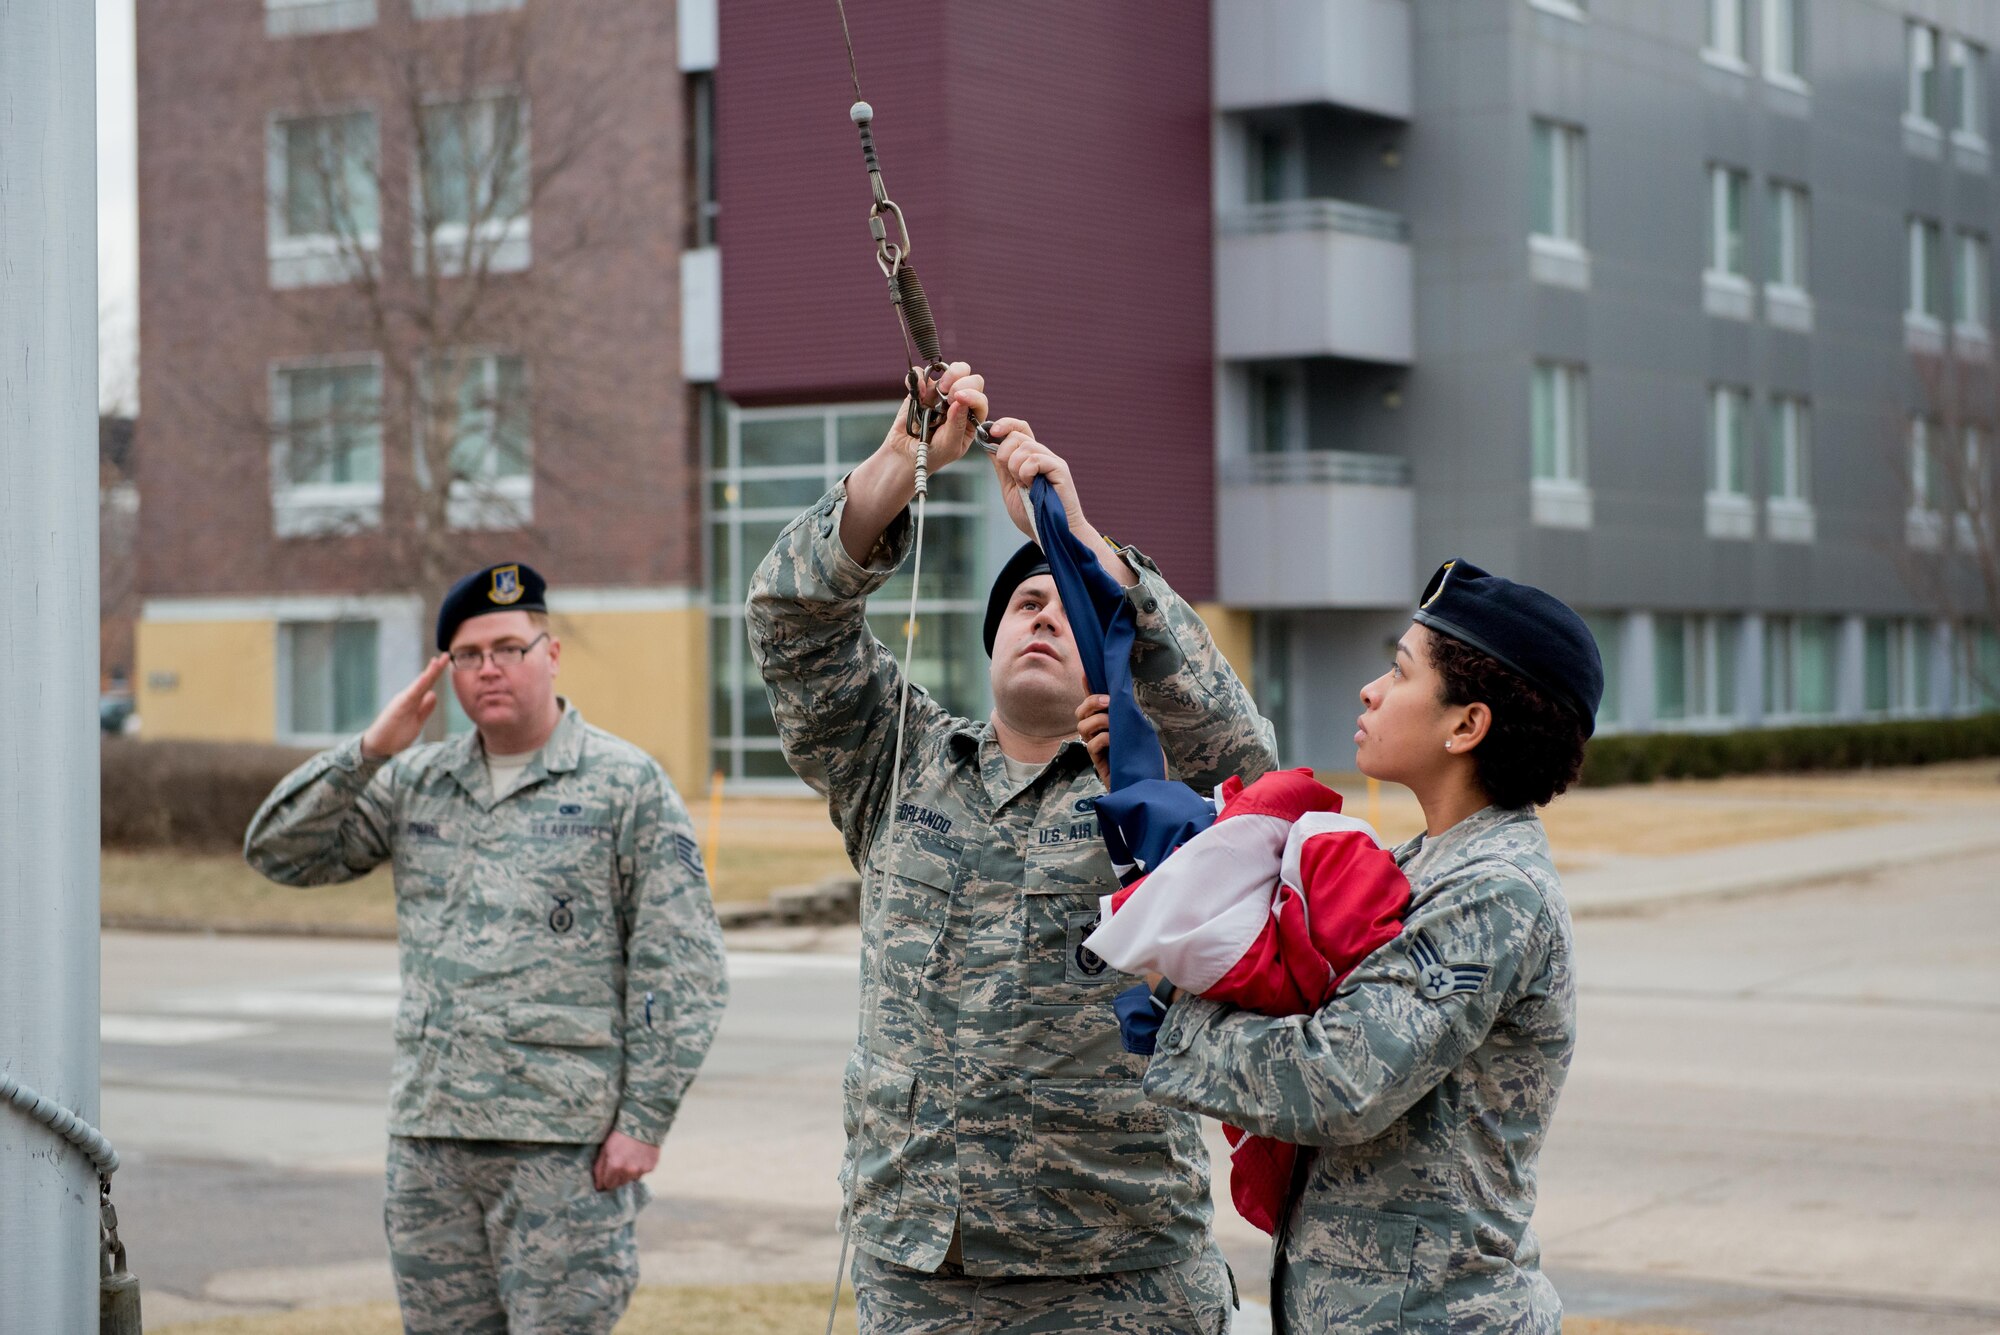 Members of the 934th Security Forces Squadron gather the flag during Retreat on Feb 11, 2017 signaling the end of the official duty day. (U.S. Air Force photo by Senior Airman Samuel Wacha)